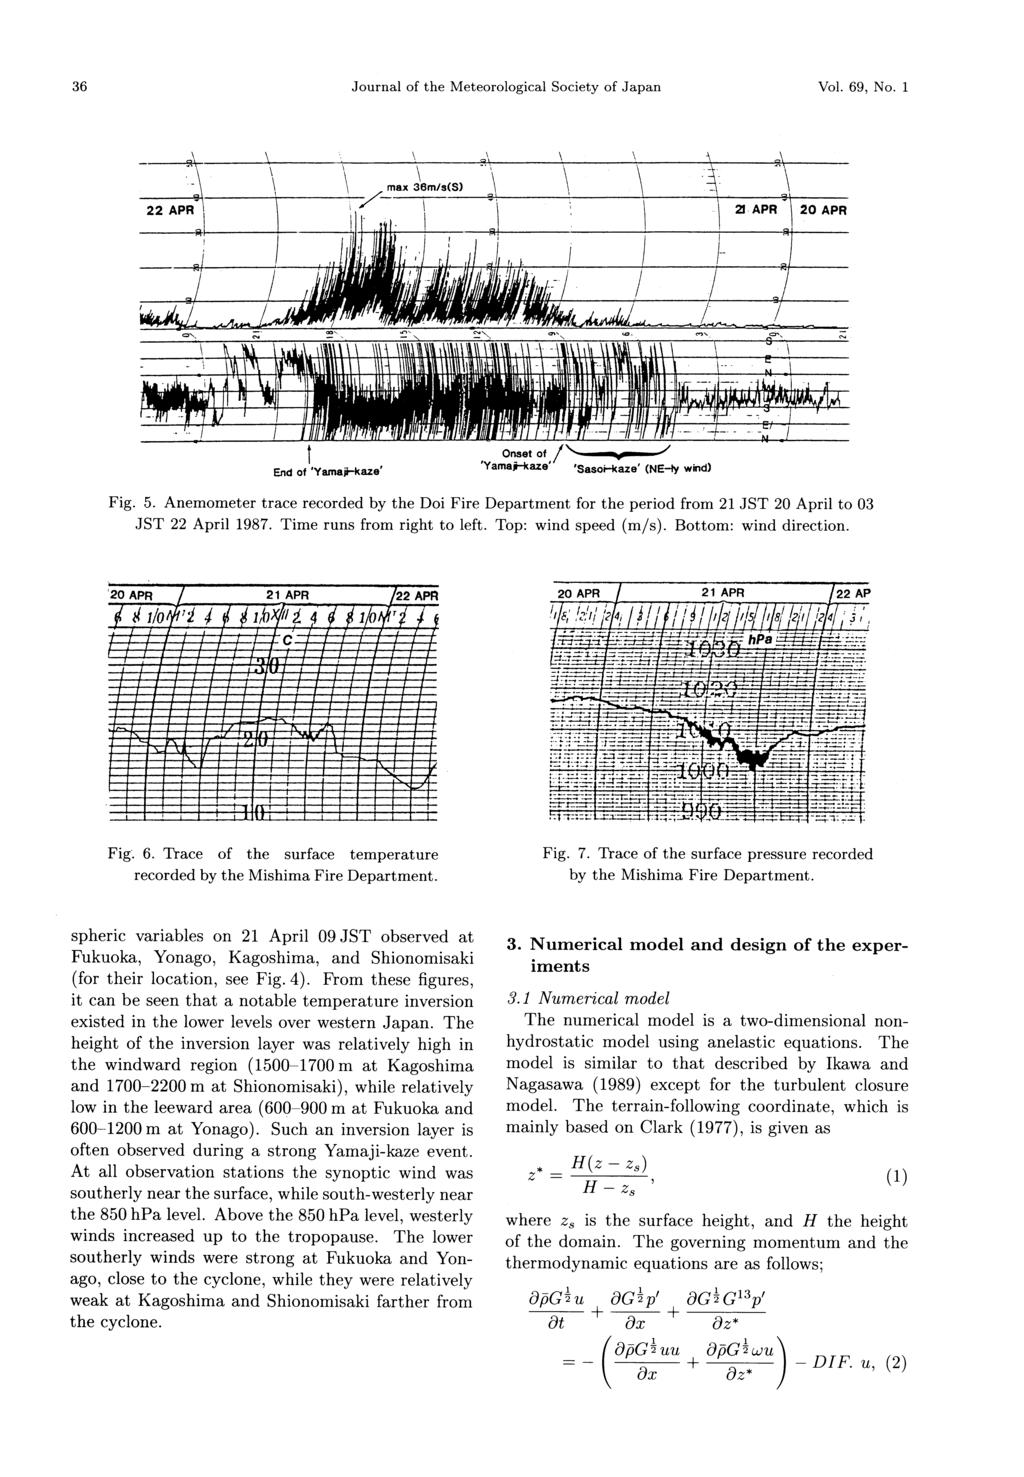 36 Journal of the Meteorological Society of Japan Vol. 69, No. 1 Fig. 5. Anemometer trace recorded by the Doi Fire Department for the period from 21 JST 20 April to 03 JST 22 April 1987.